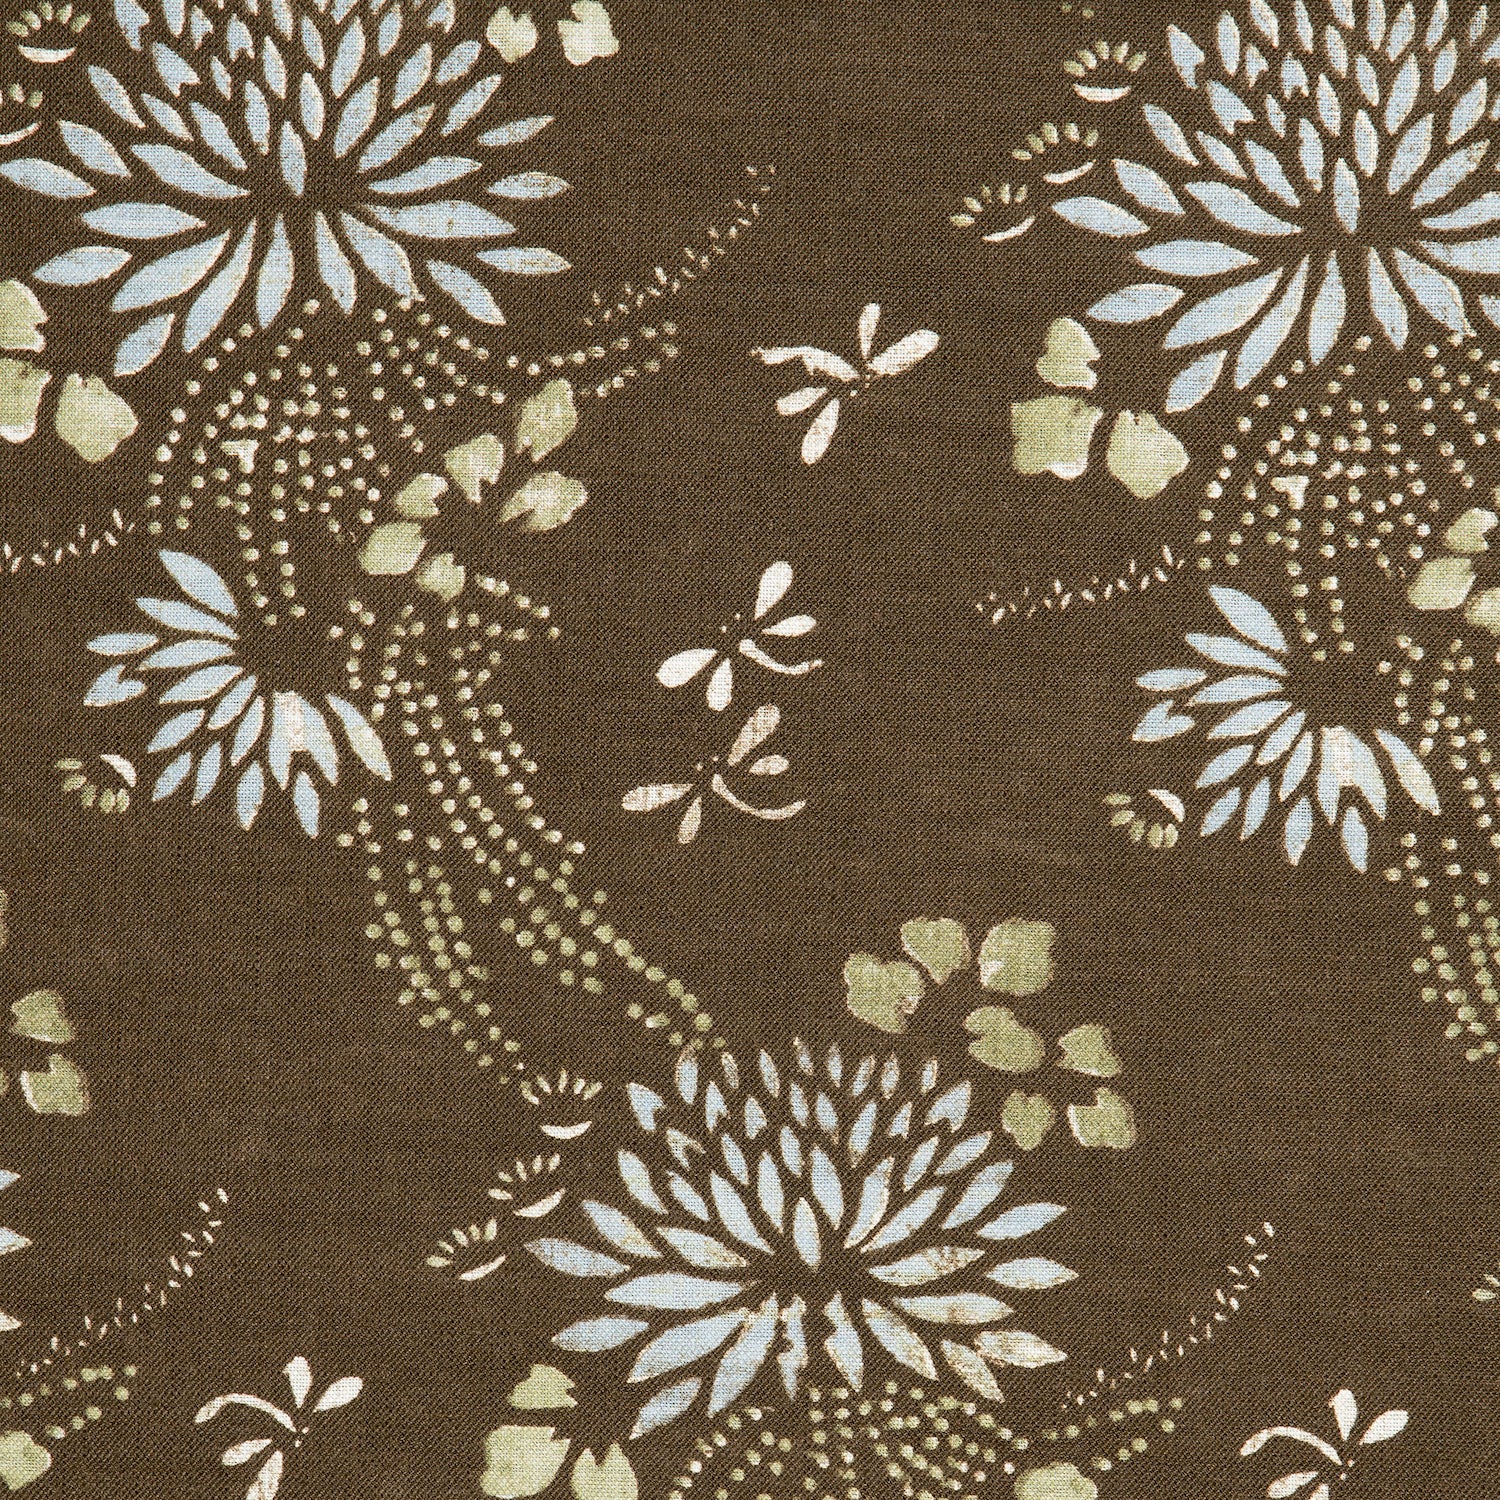 Detail of a linen fabric in a floral and dot pattern in beige and white on a brown field.